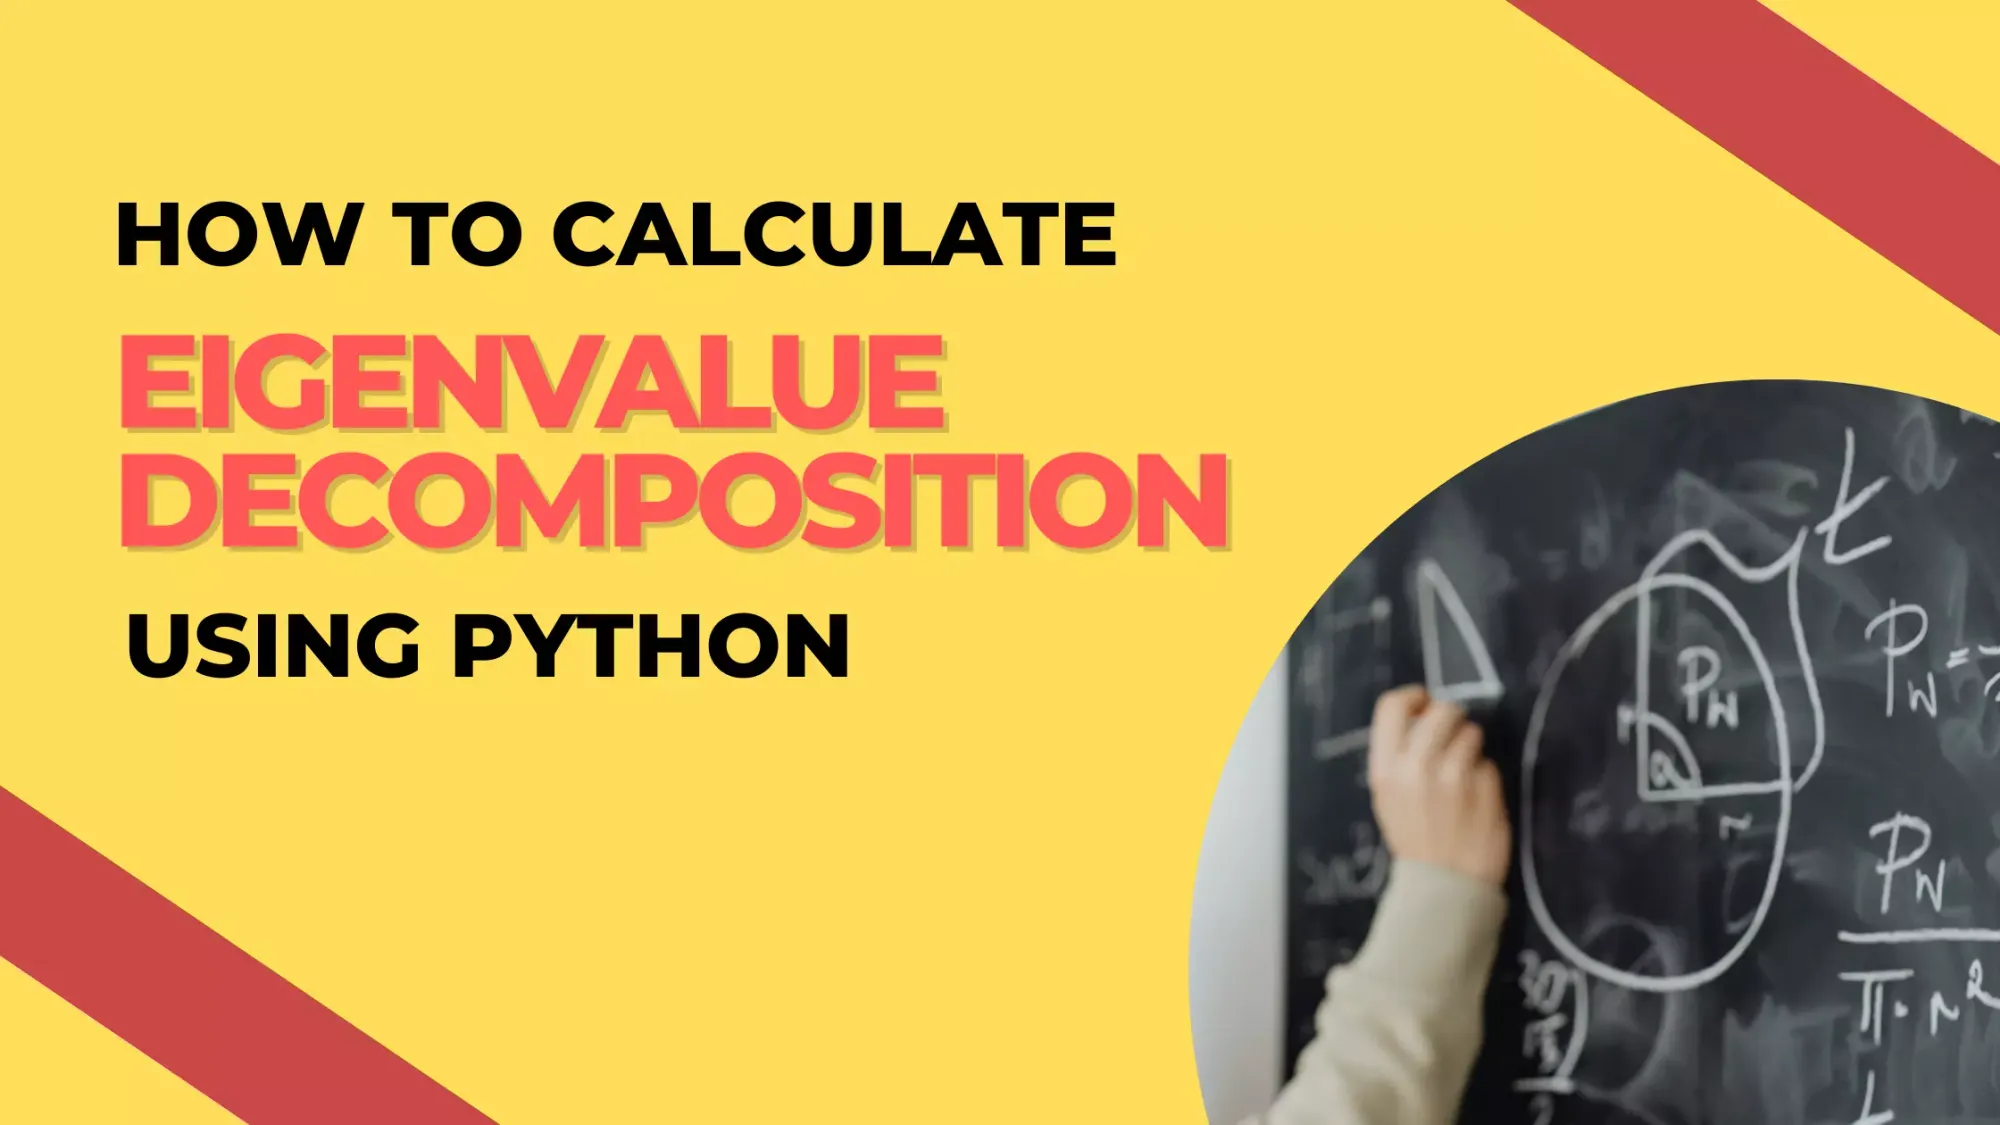 How to Calculate Eigenvalue Decomposition in Python